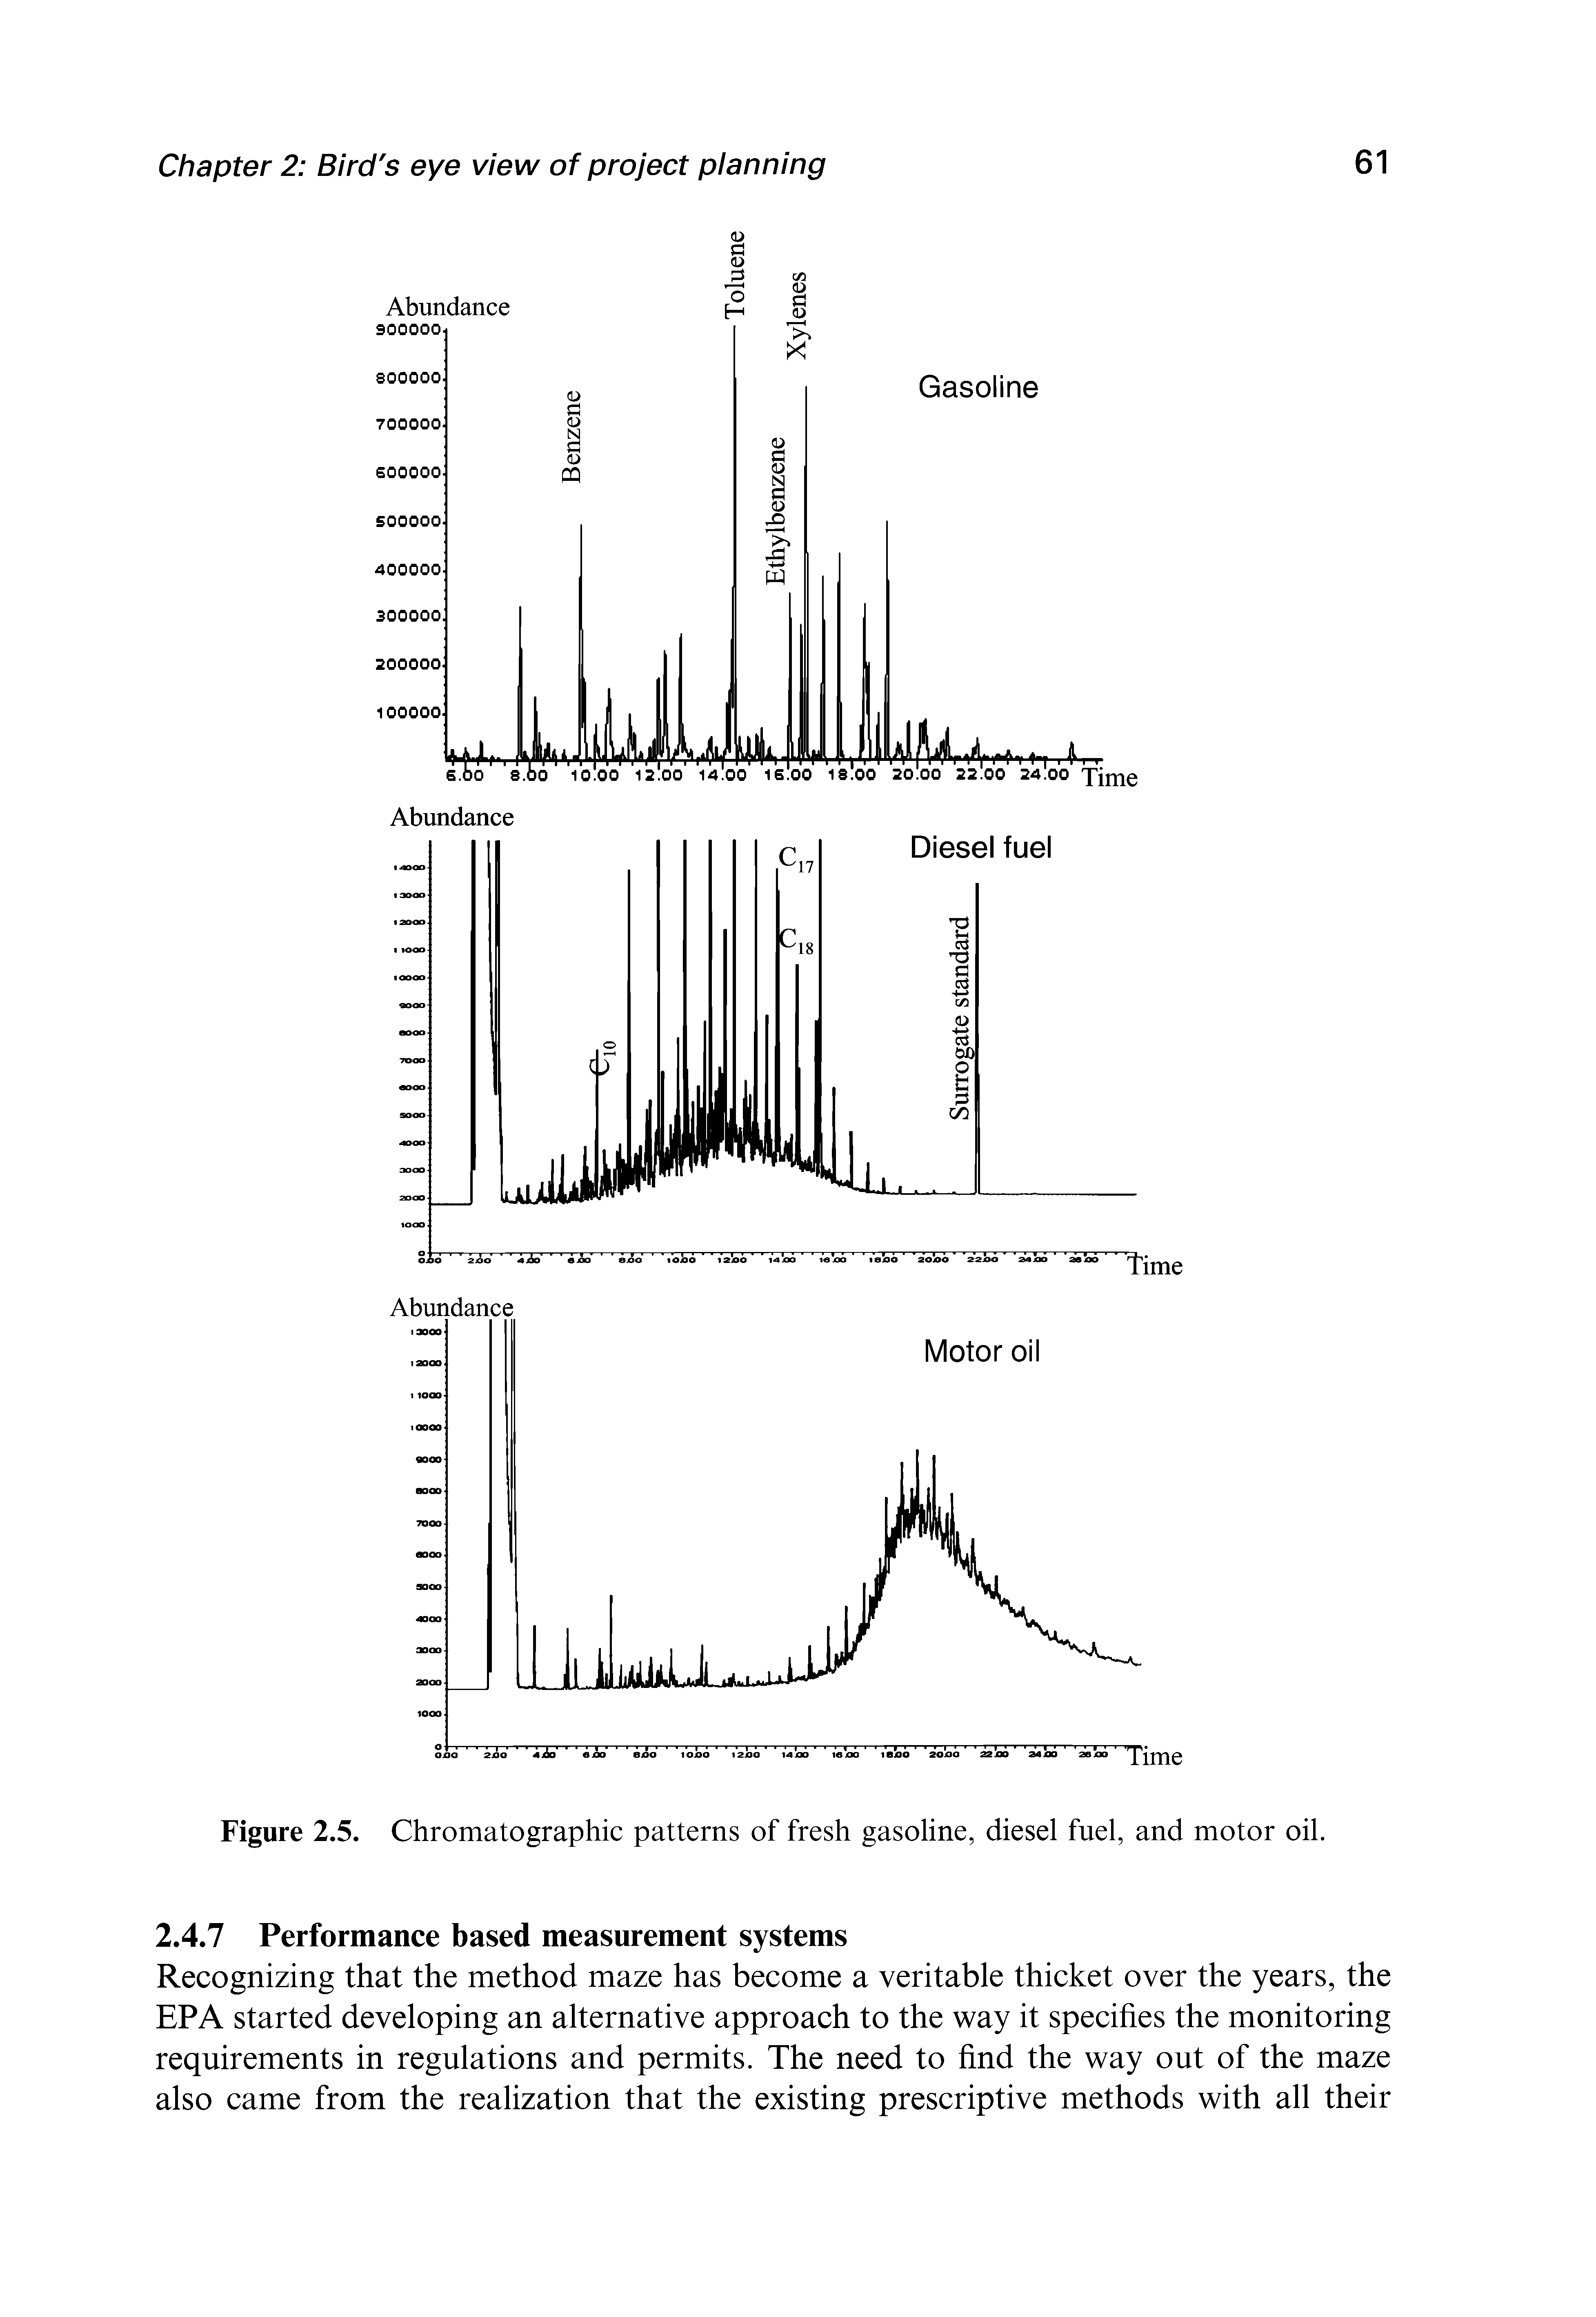 Figure 2.5. Chromatographic patterns of fresh gasoline, diesel fuel, and motor oil.